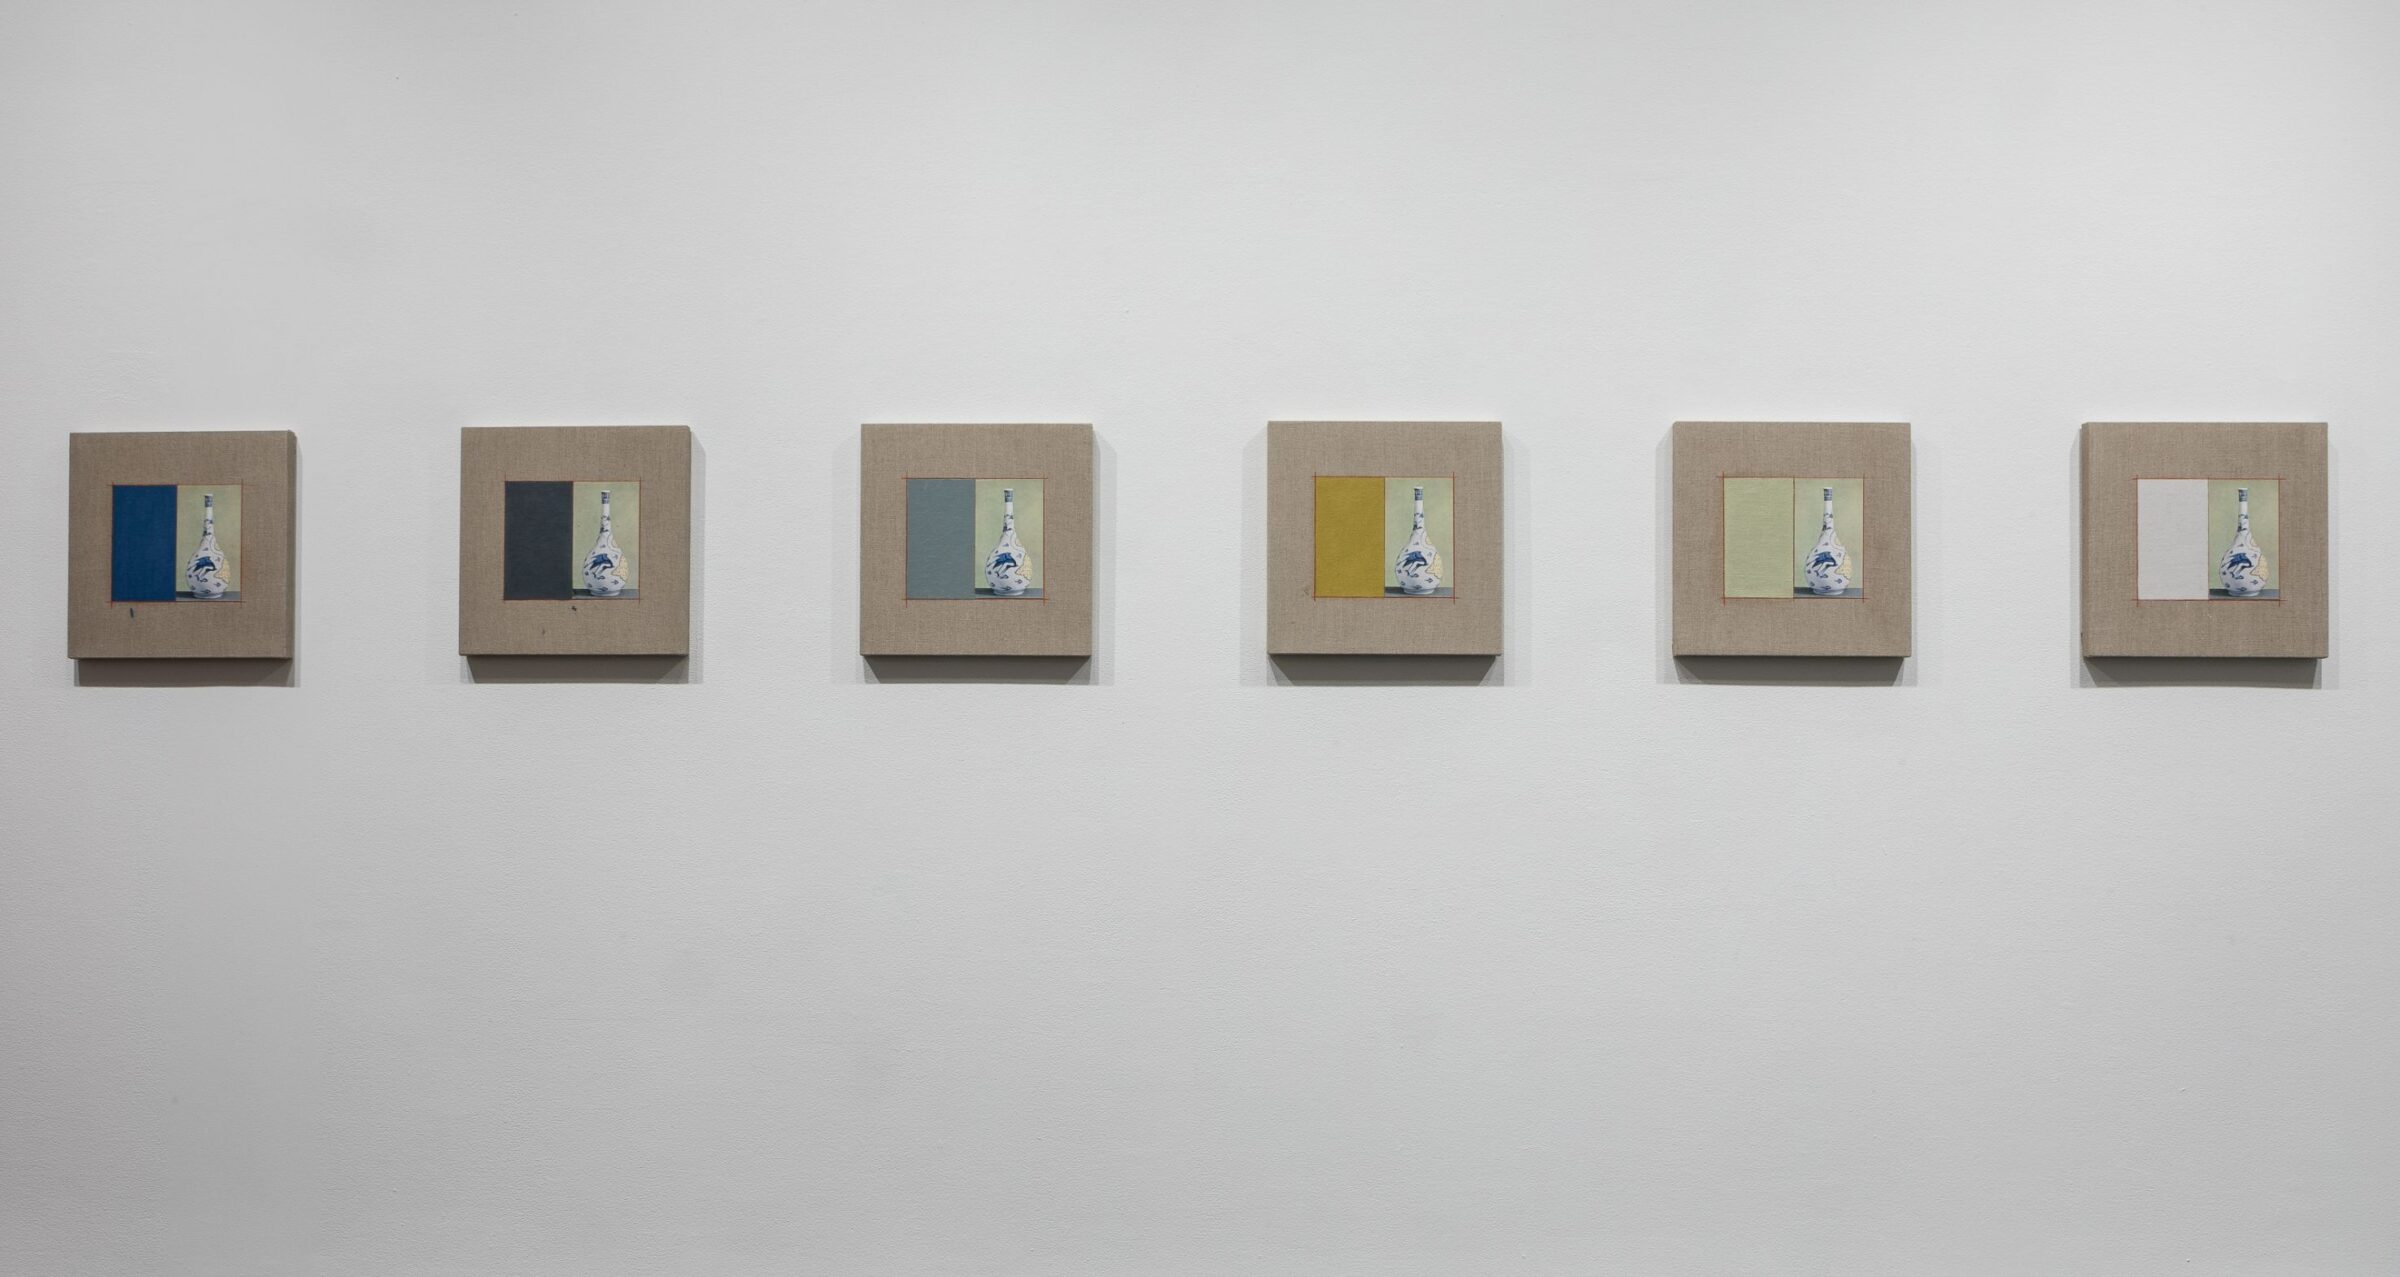 A series of six small square paintings of a decorative bottle arranged in a line on a white gallery wall.